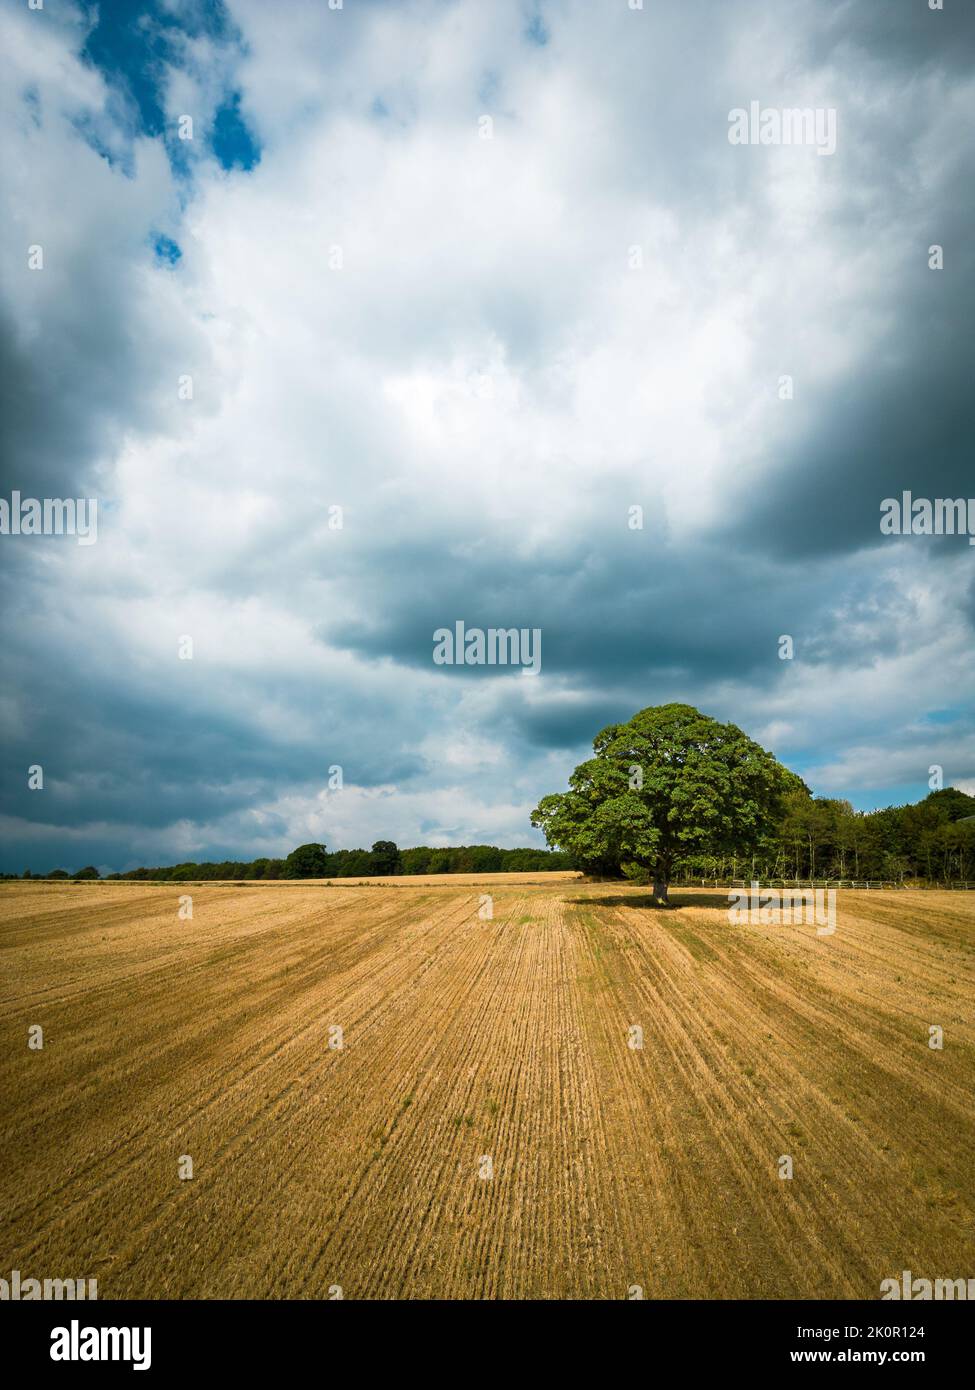 One tree in farmland beneath storm clouds. Barren, dry looking land surrounds a tree with lush green leaves. Stock Photo